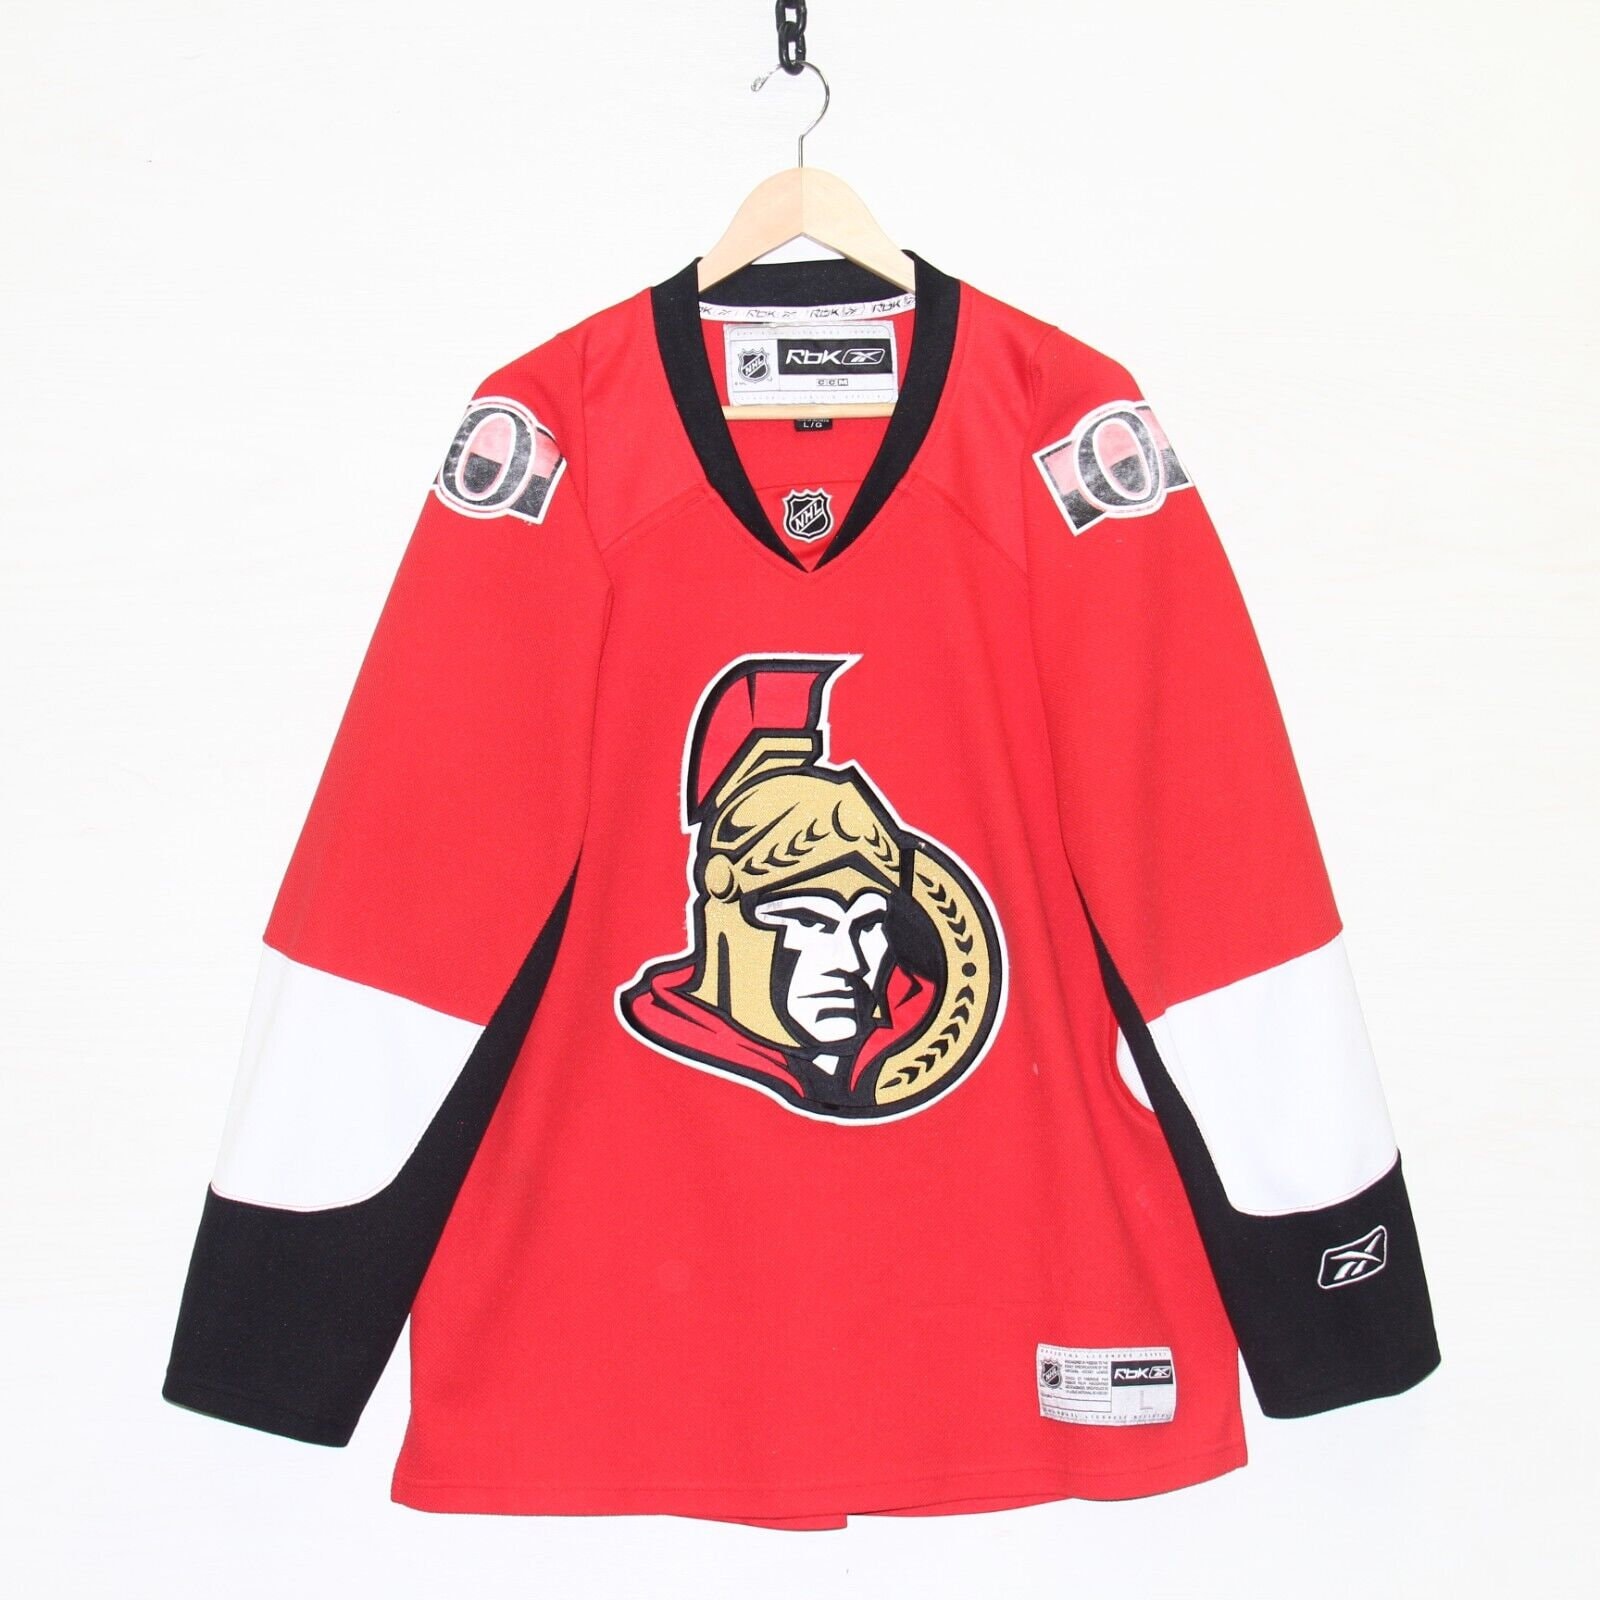 When new jerseys have been purchased, other jerseys must become available.  Check captions and comments for prices! : r/hockeyjerseys